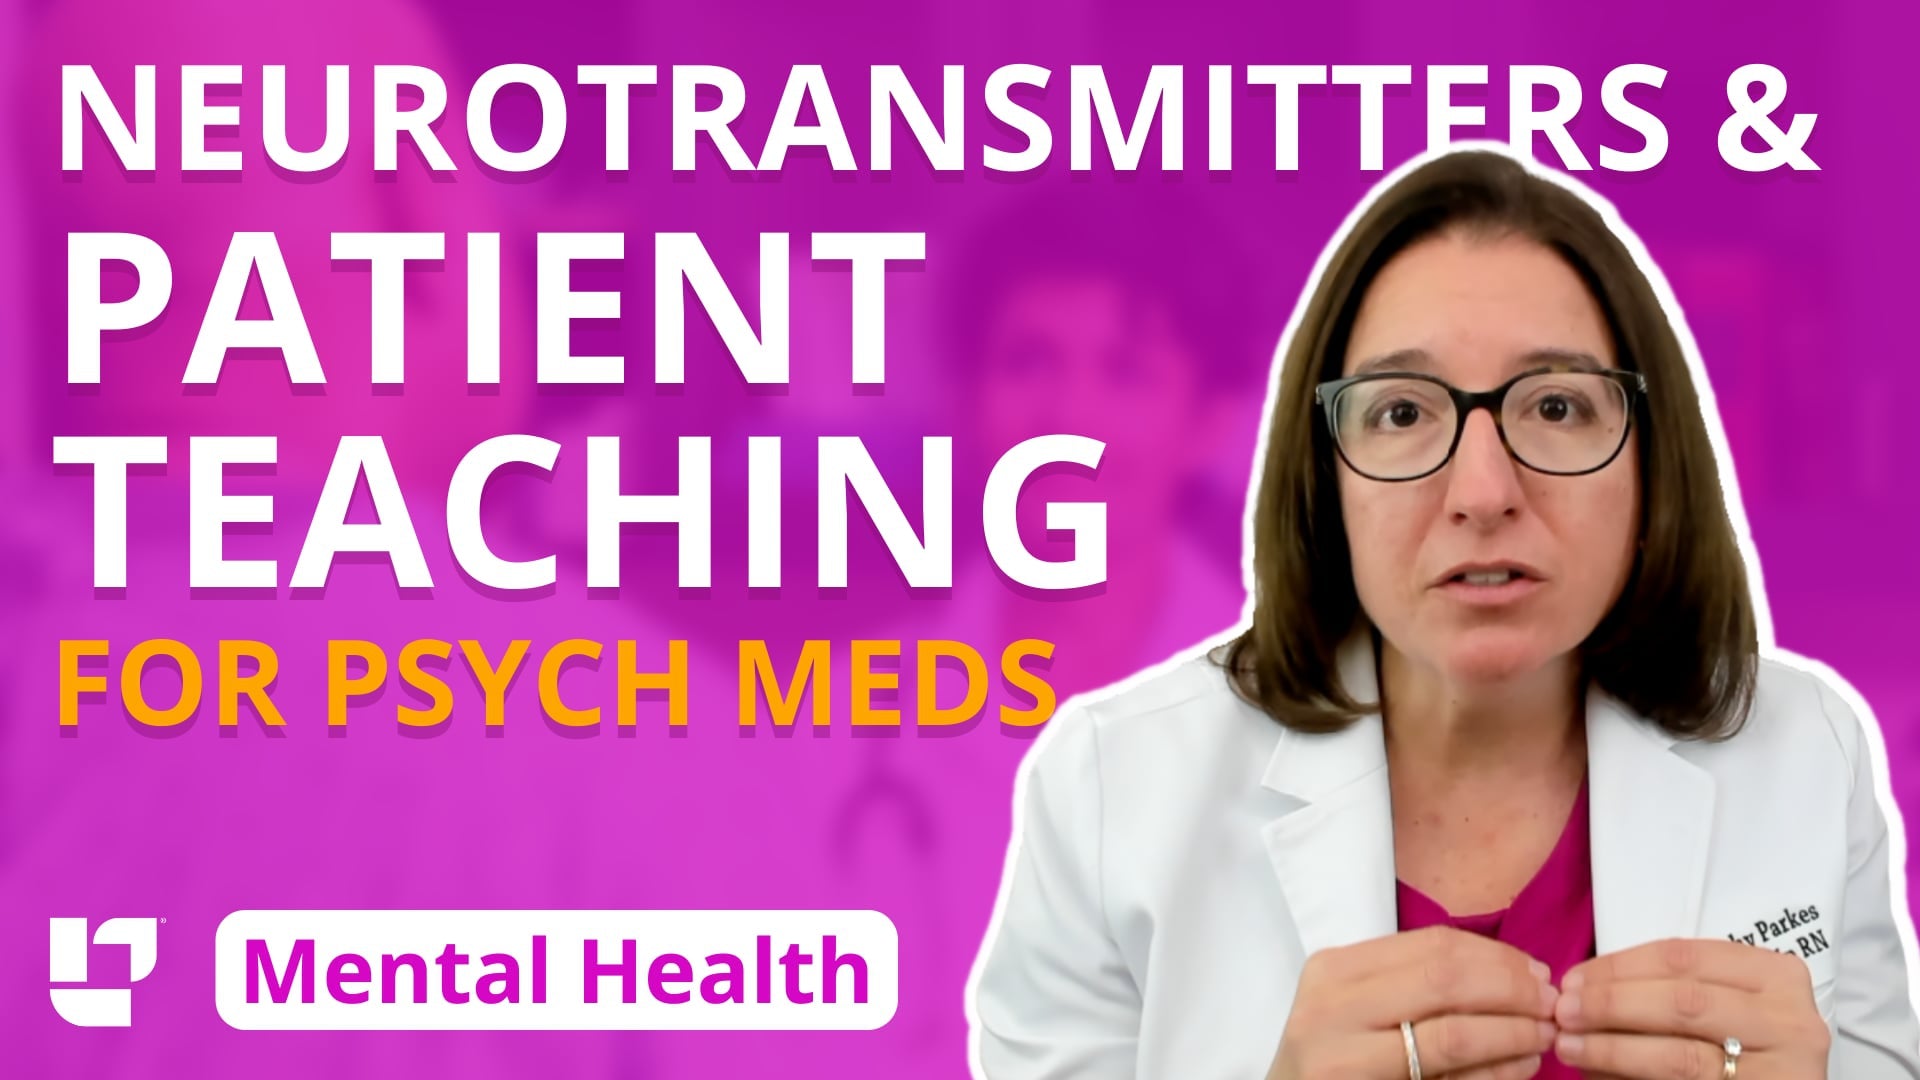 Psychiatric Mental Health, part 16: Therapies - Neurotransmitters & Patient Teaching for Psych Meds - LevelUpRN